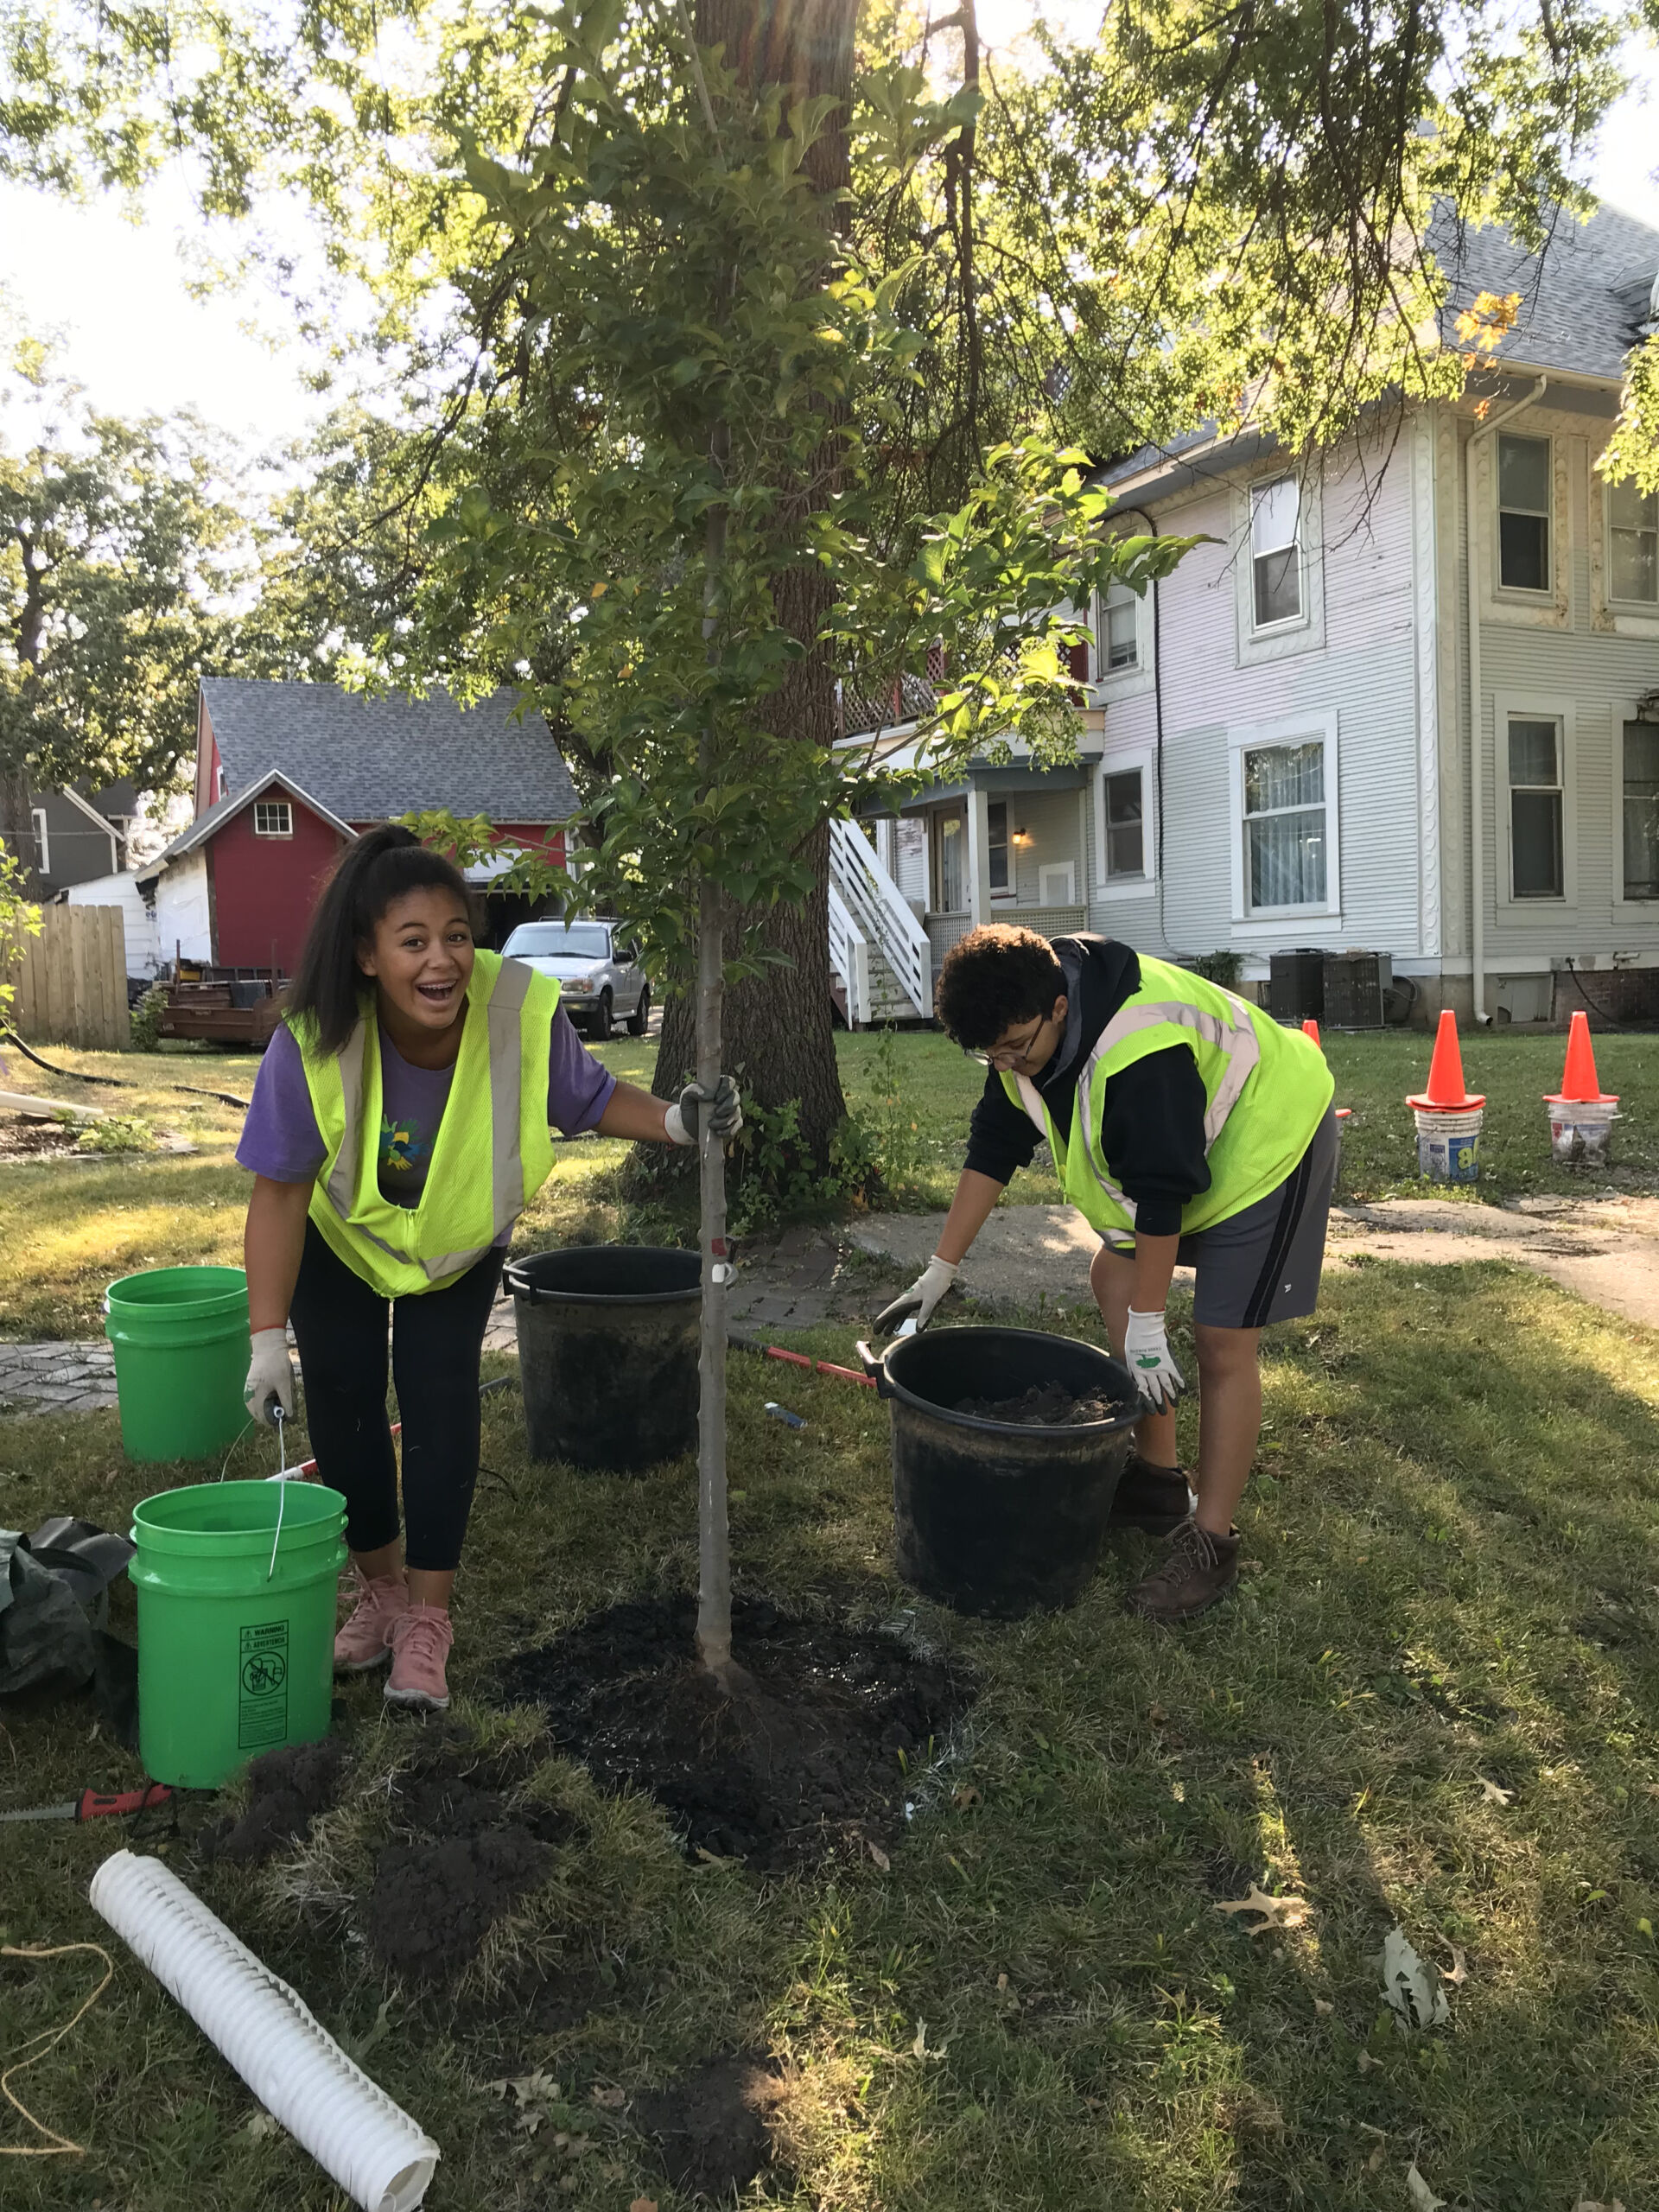 Two young people planting a tree outside a home